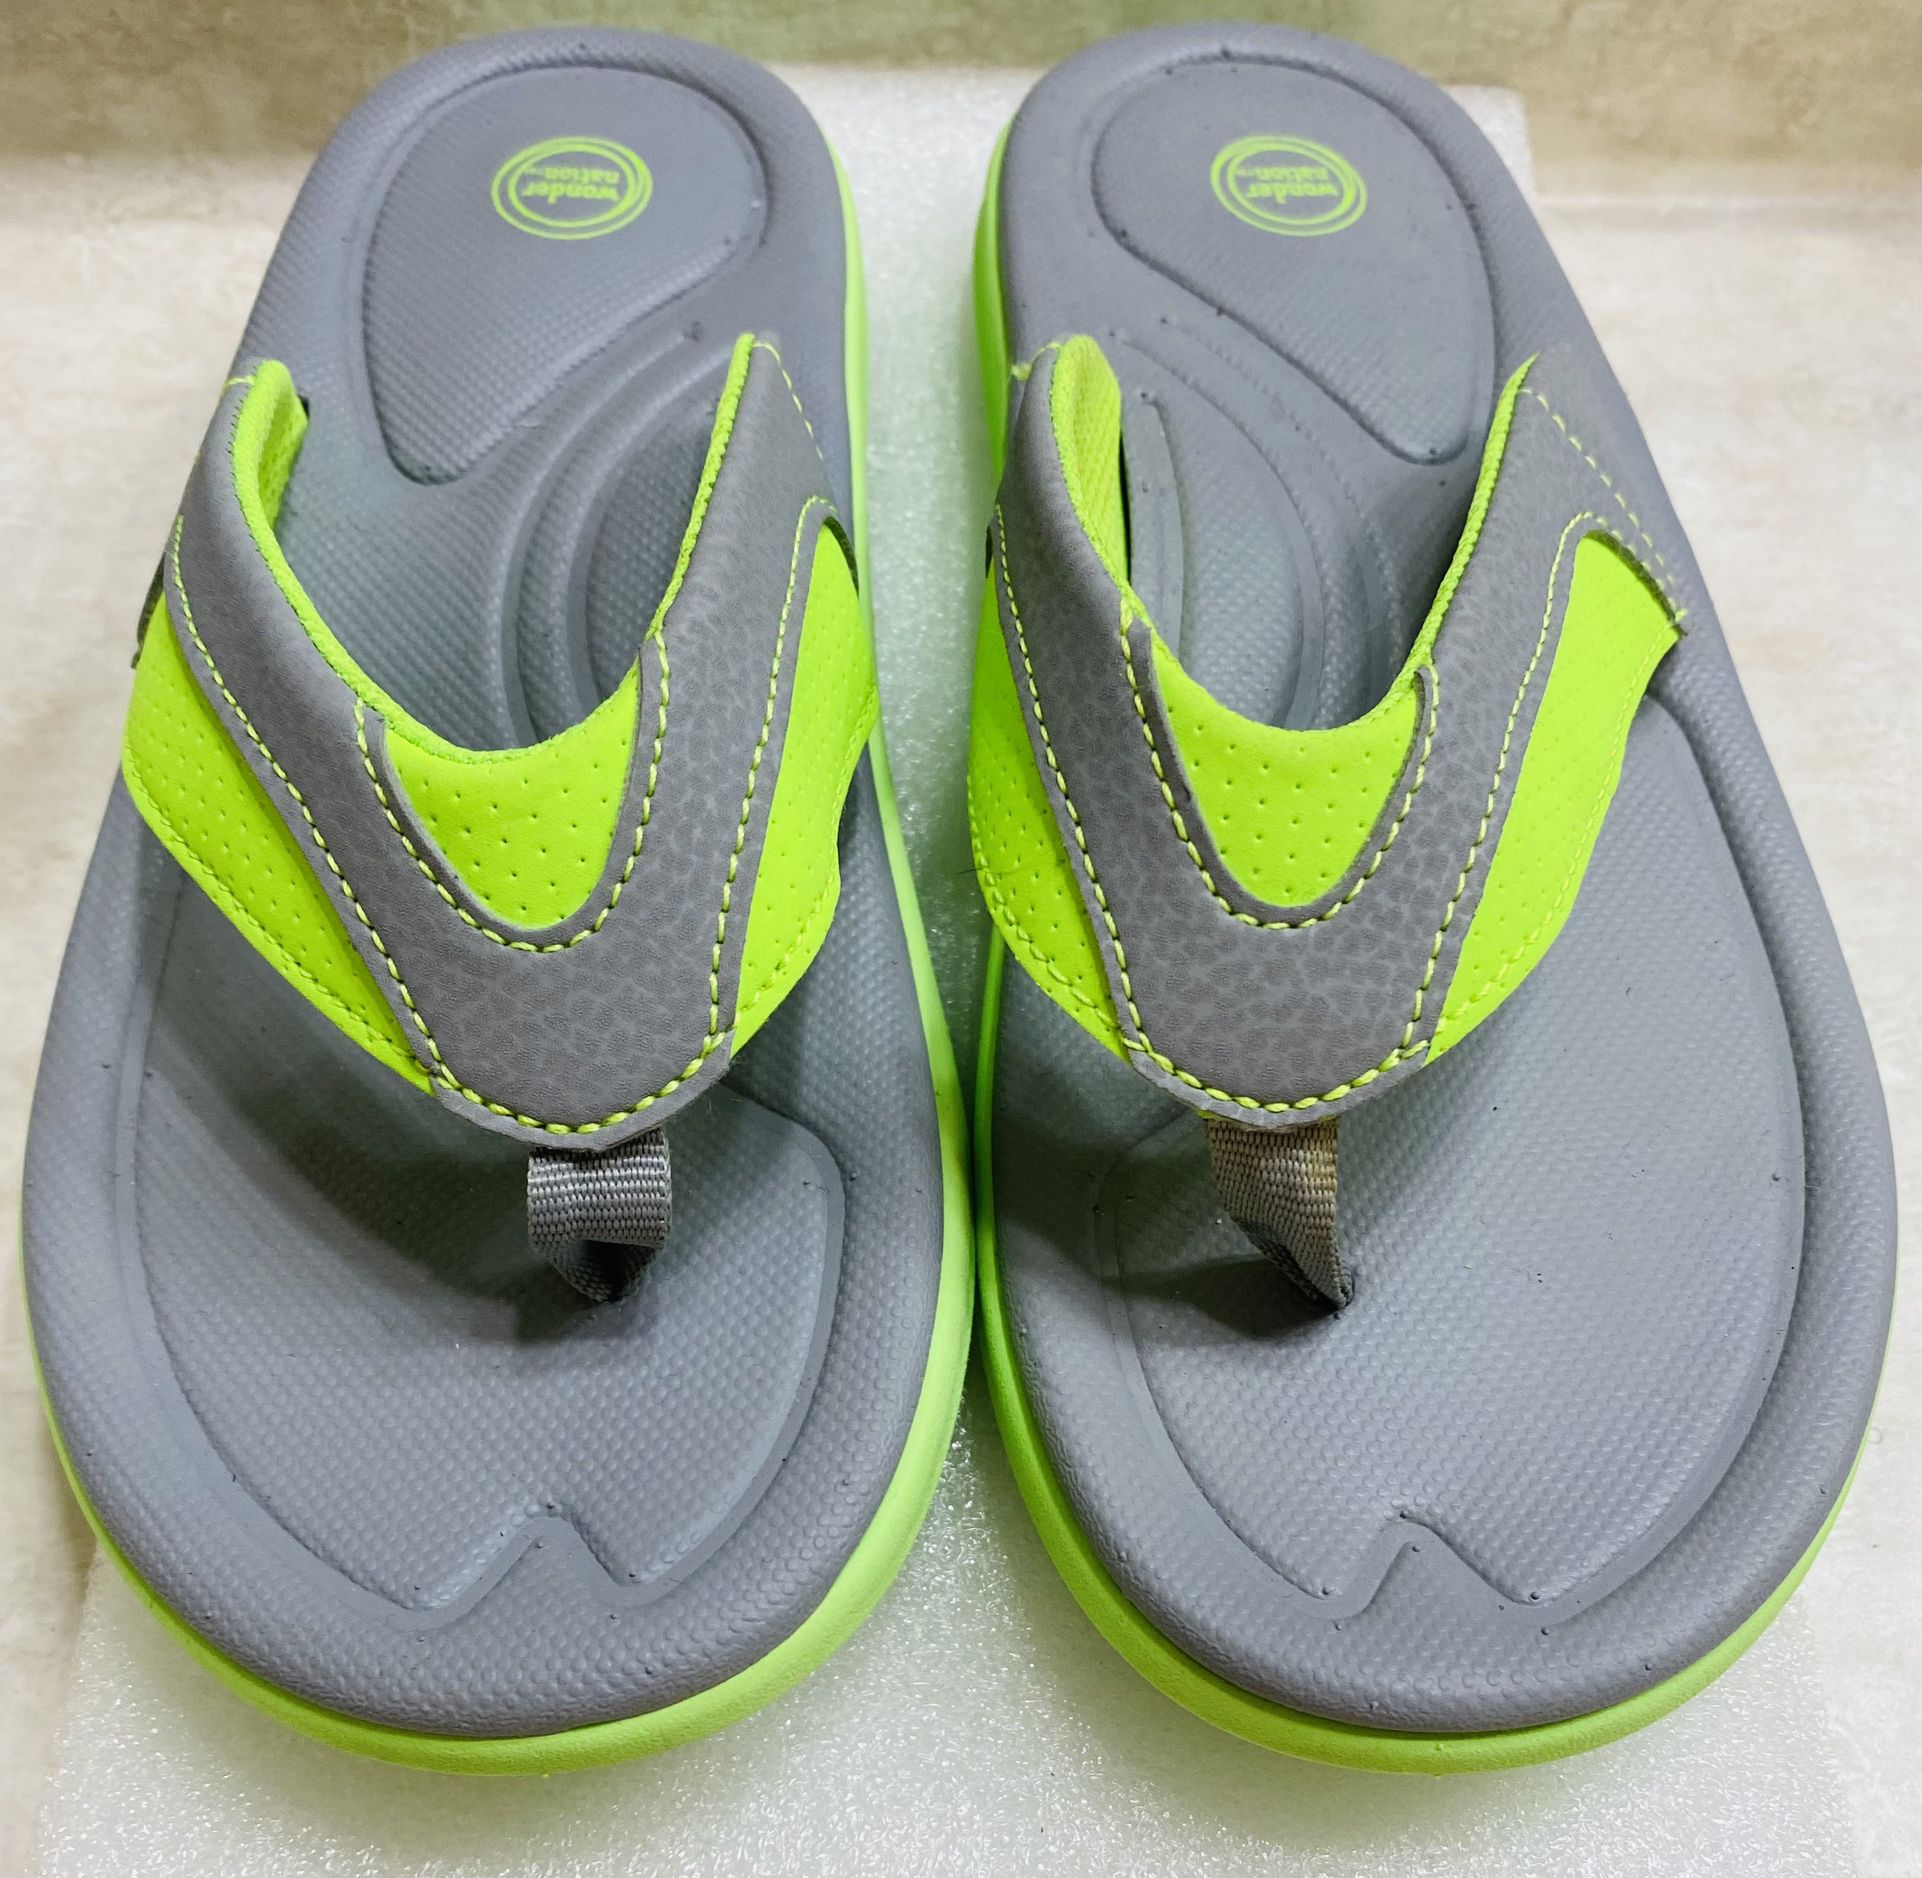 Boys Neon & Gray Cool Beach Sandals/Slides: In great condition!